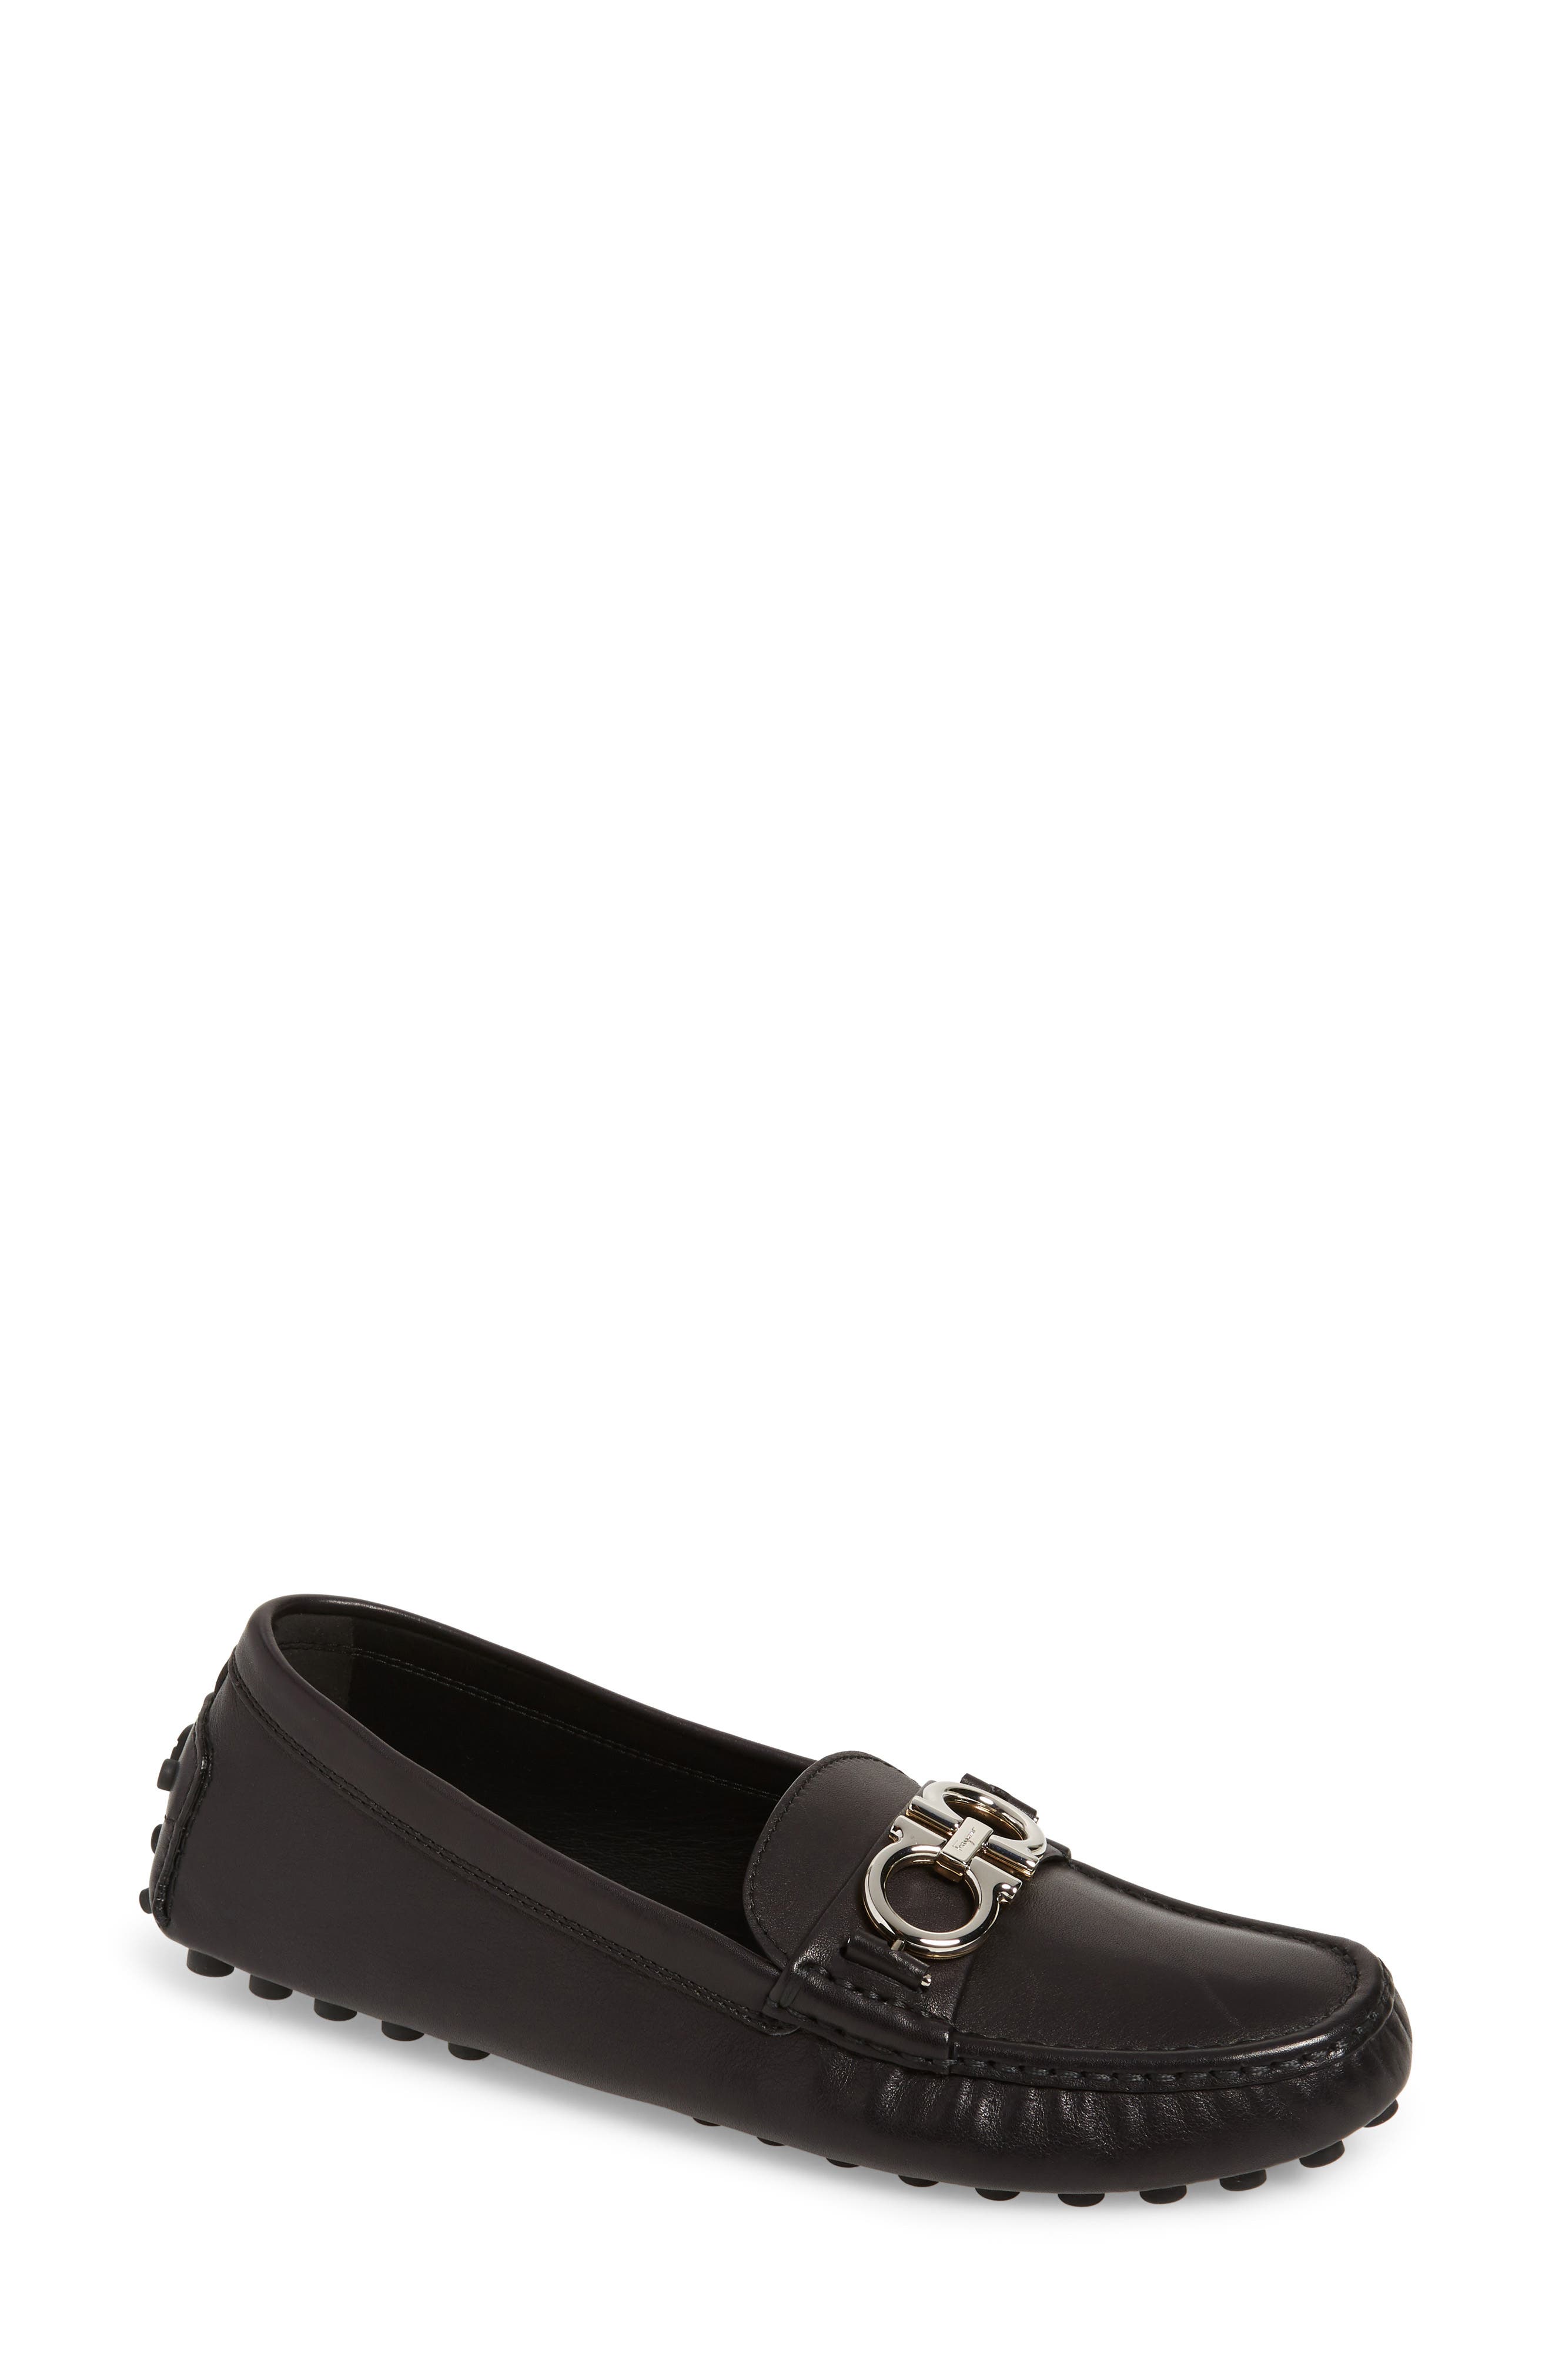 black buckle loafers womens